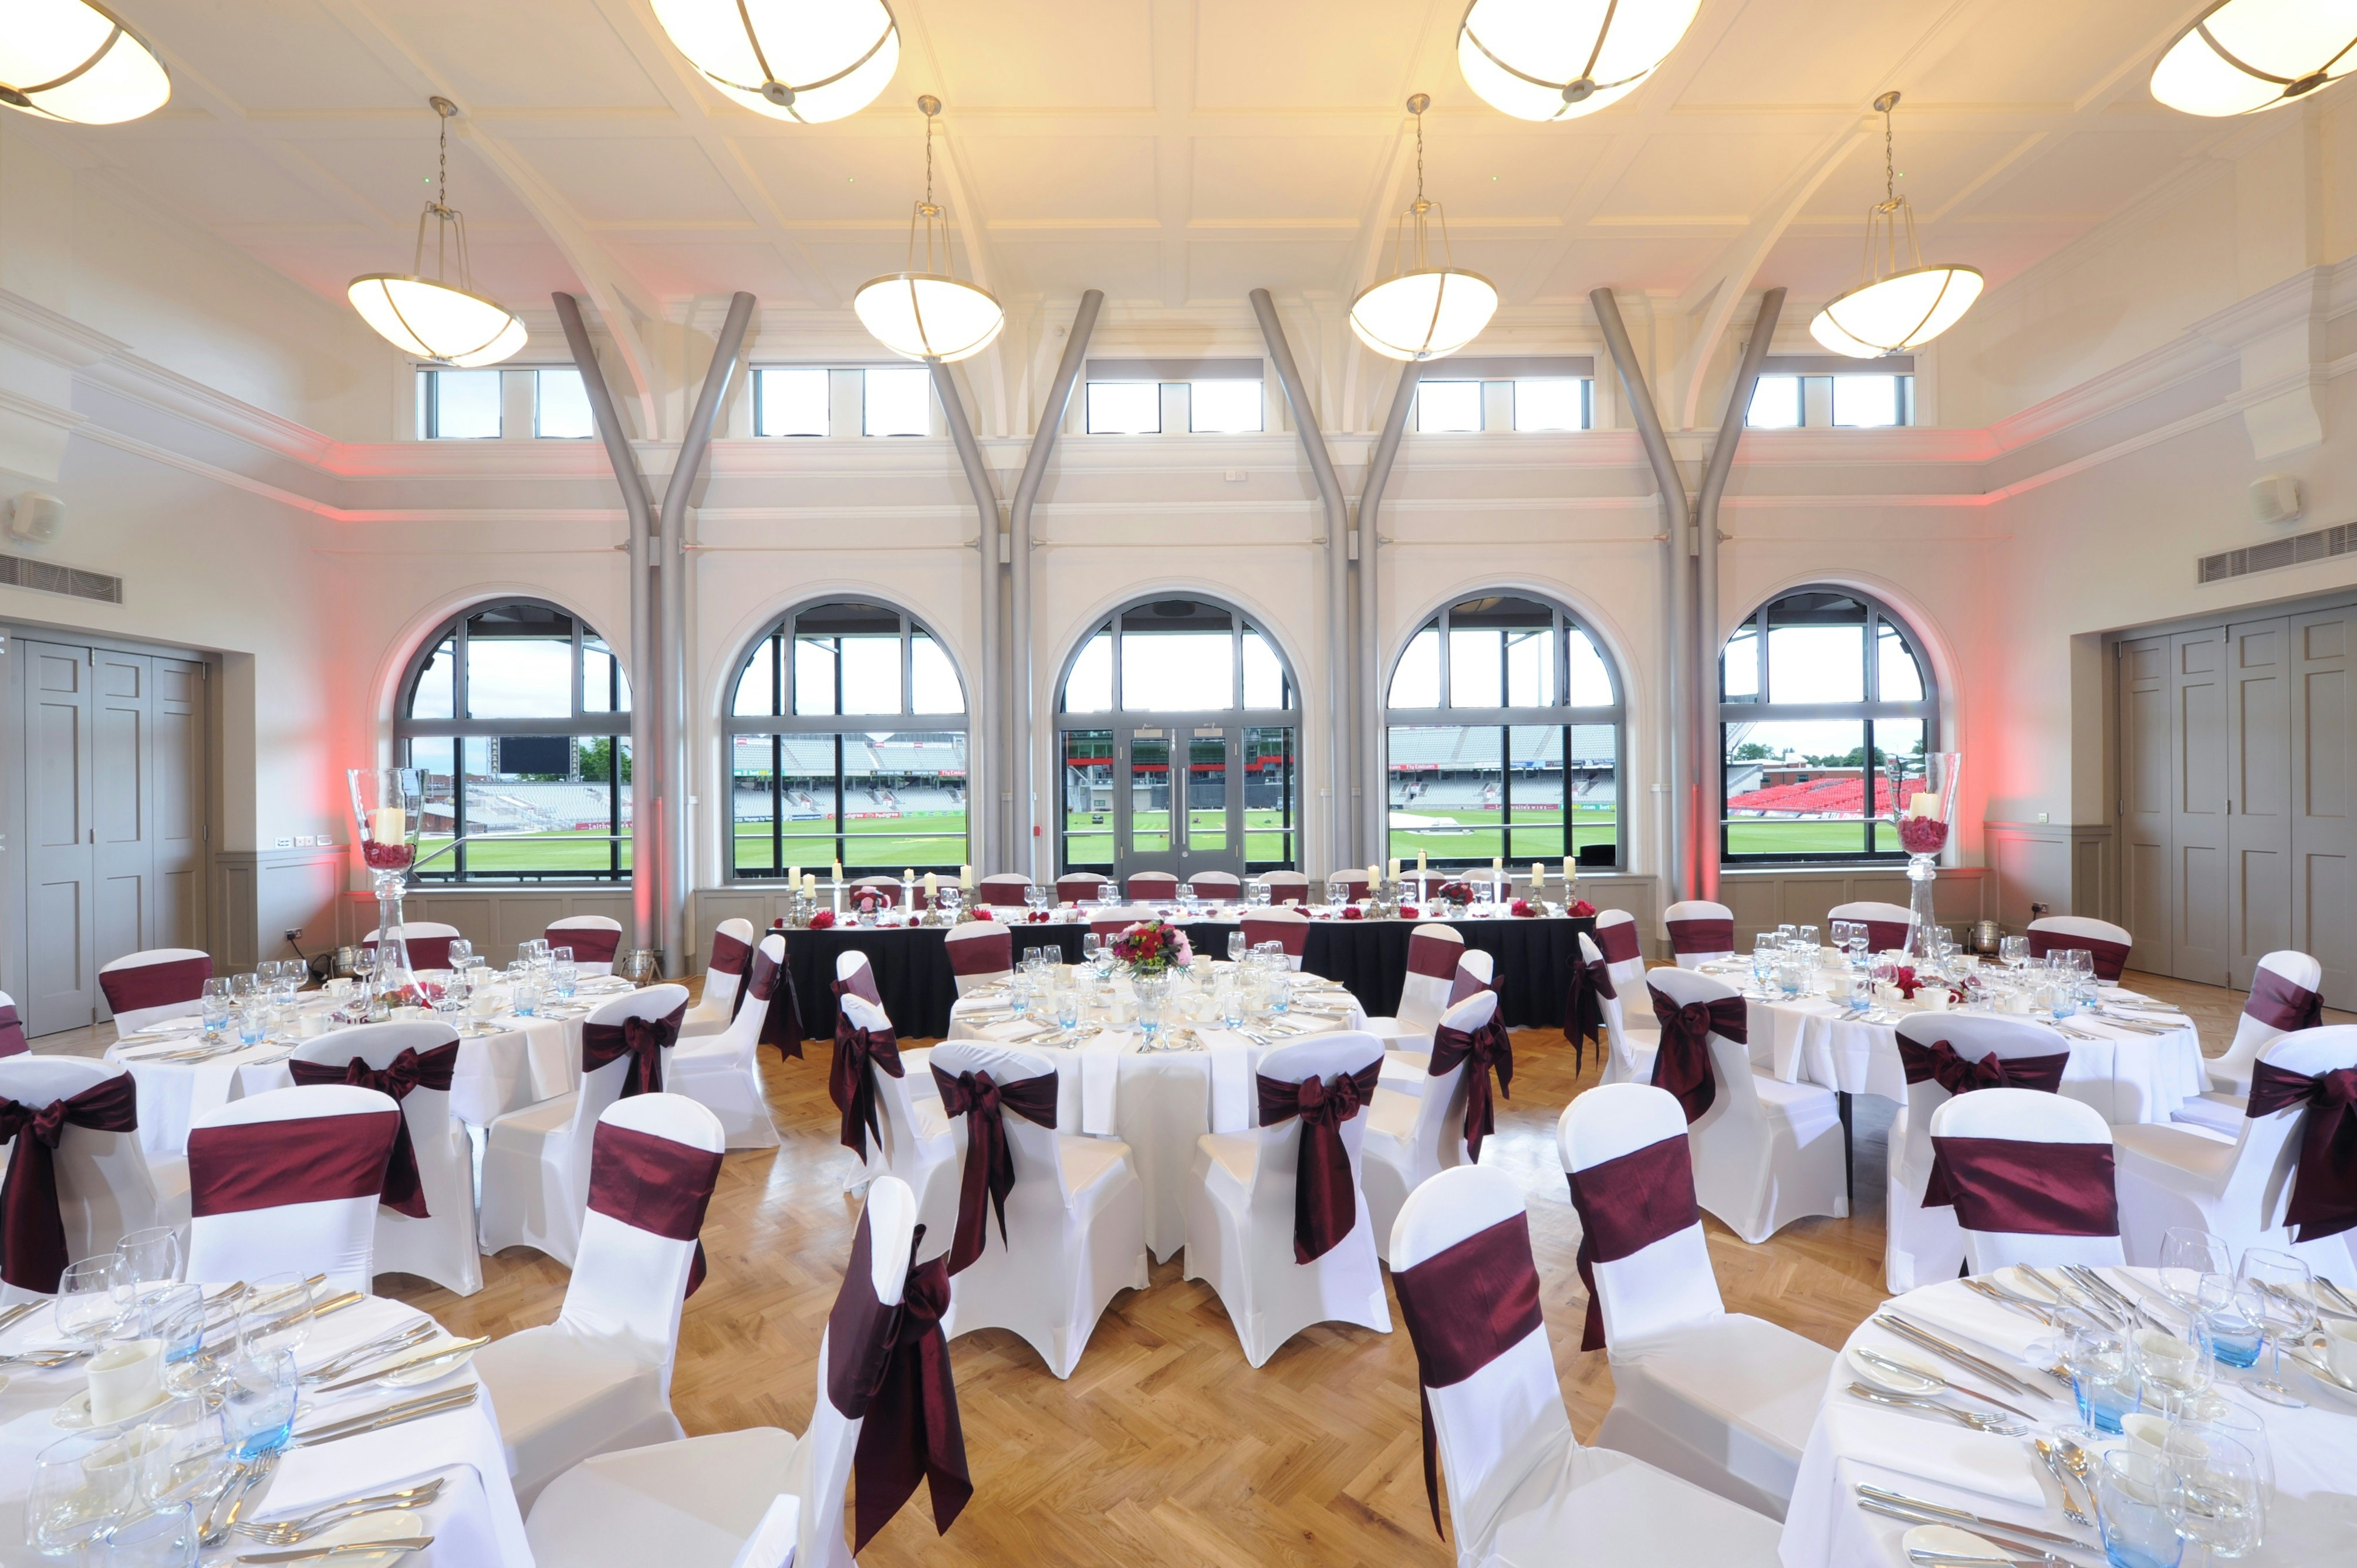 Gala Dinner Venues in Manchester - Pavilion, Emirates Old Trafford Lancashire County Cricket Club